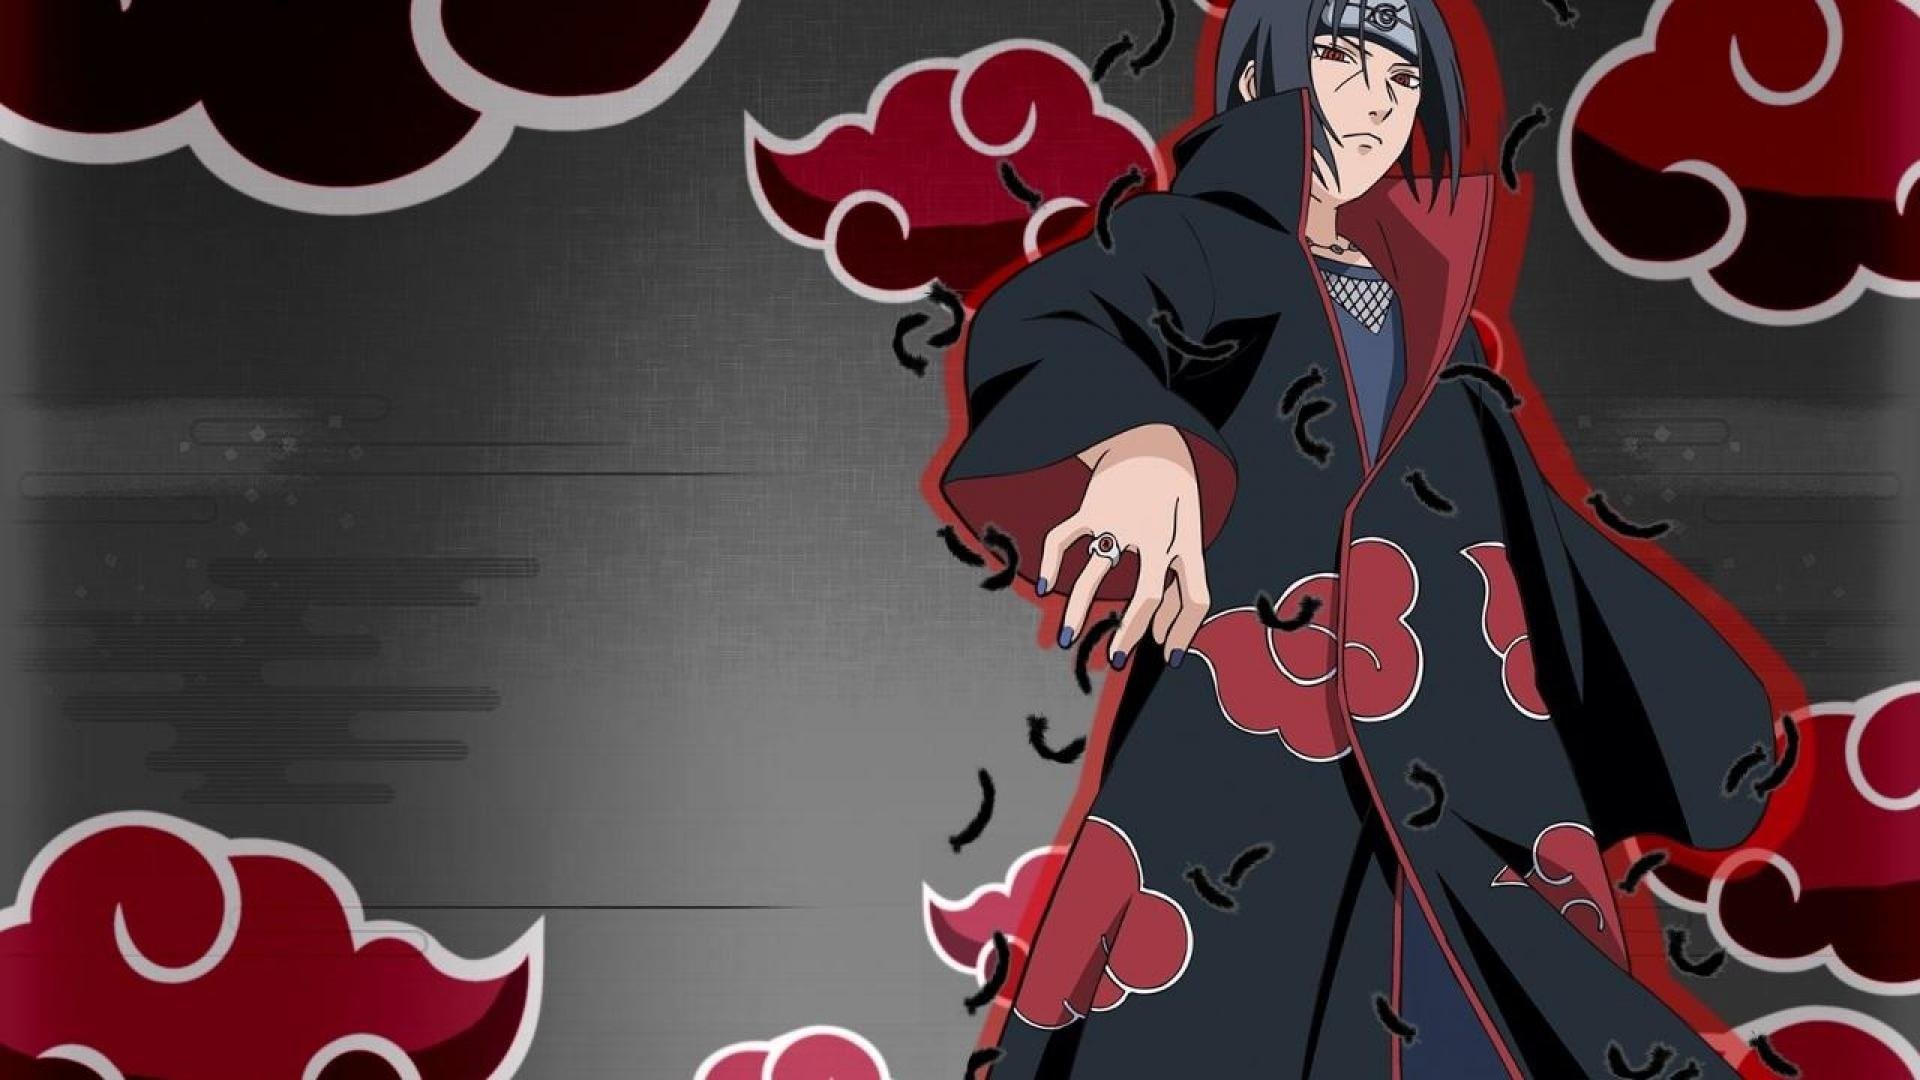 1920x1080 Search Results for “itachi uchiha wallpaper pack” – Adorable Wallpapers